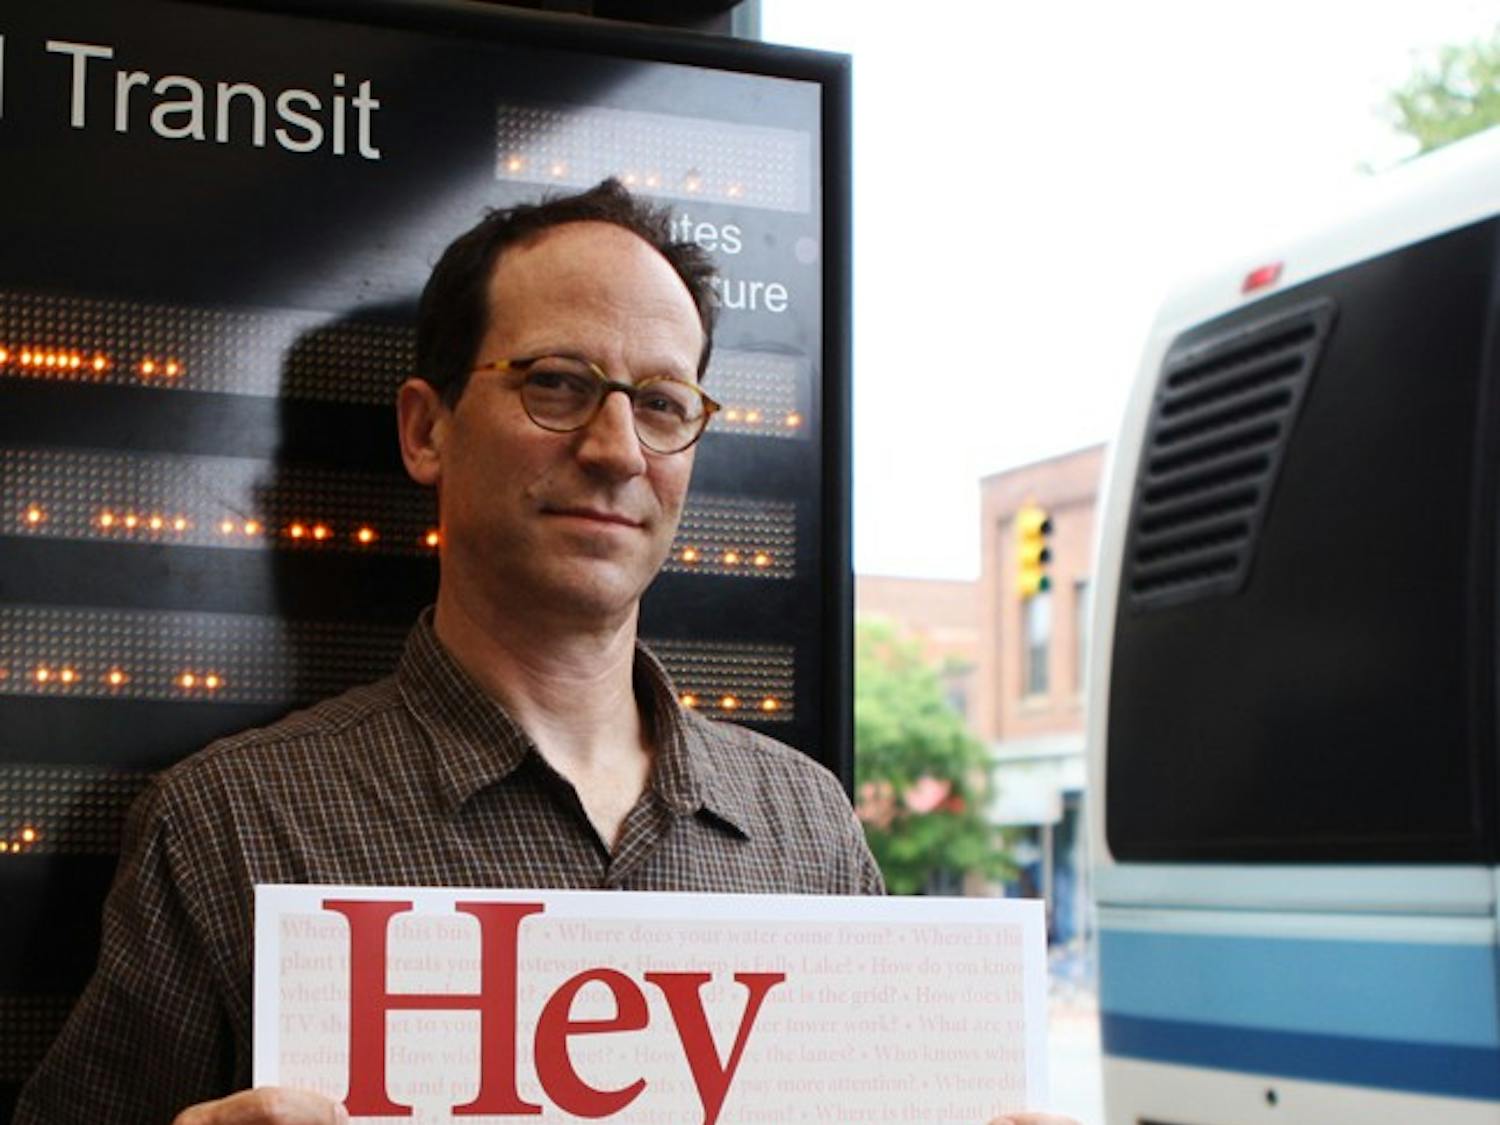 Photo: Piedmont Laureate’s words to grace Triangle-area buses (Erin Hull)